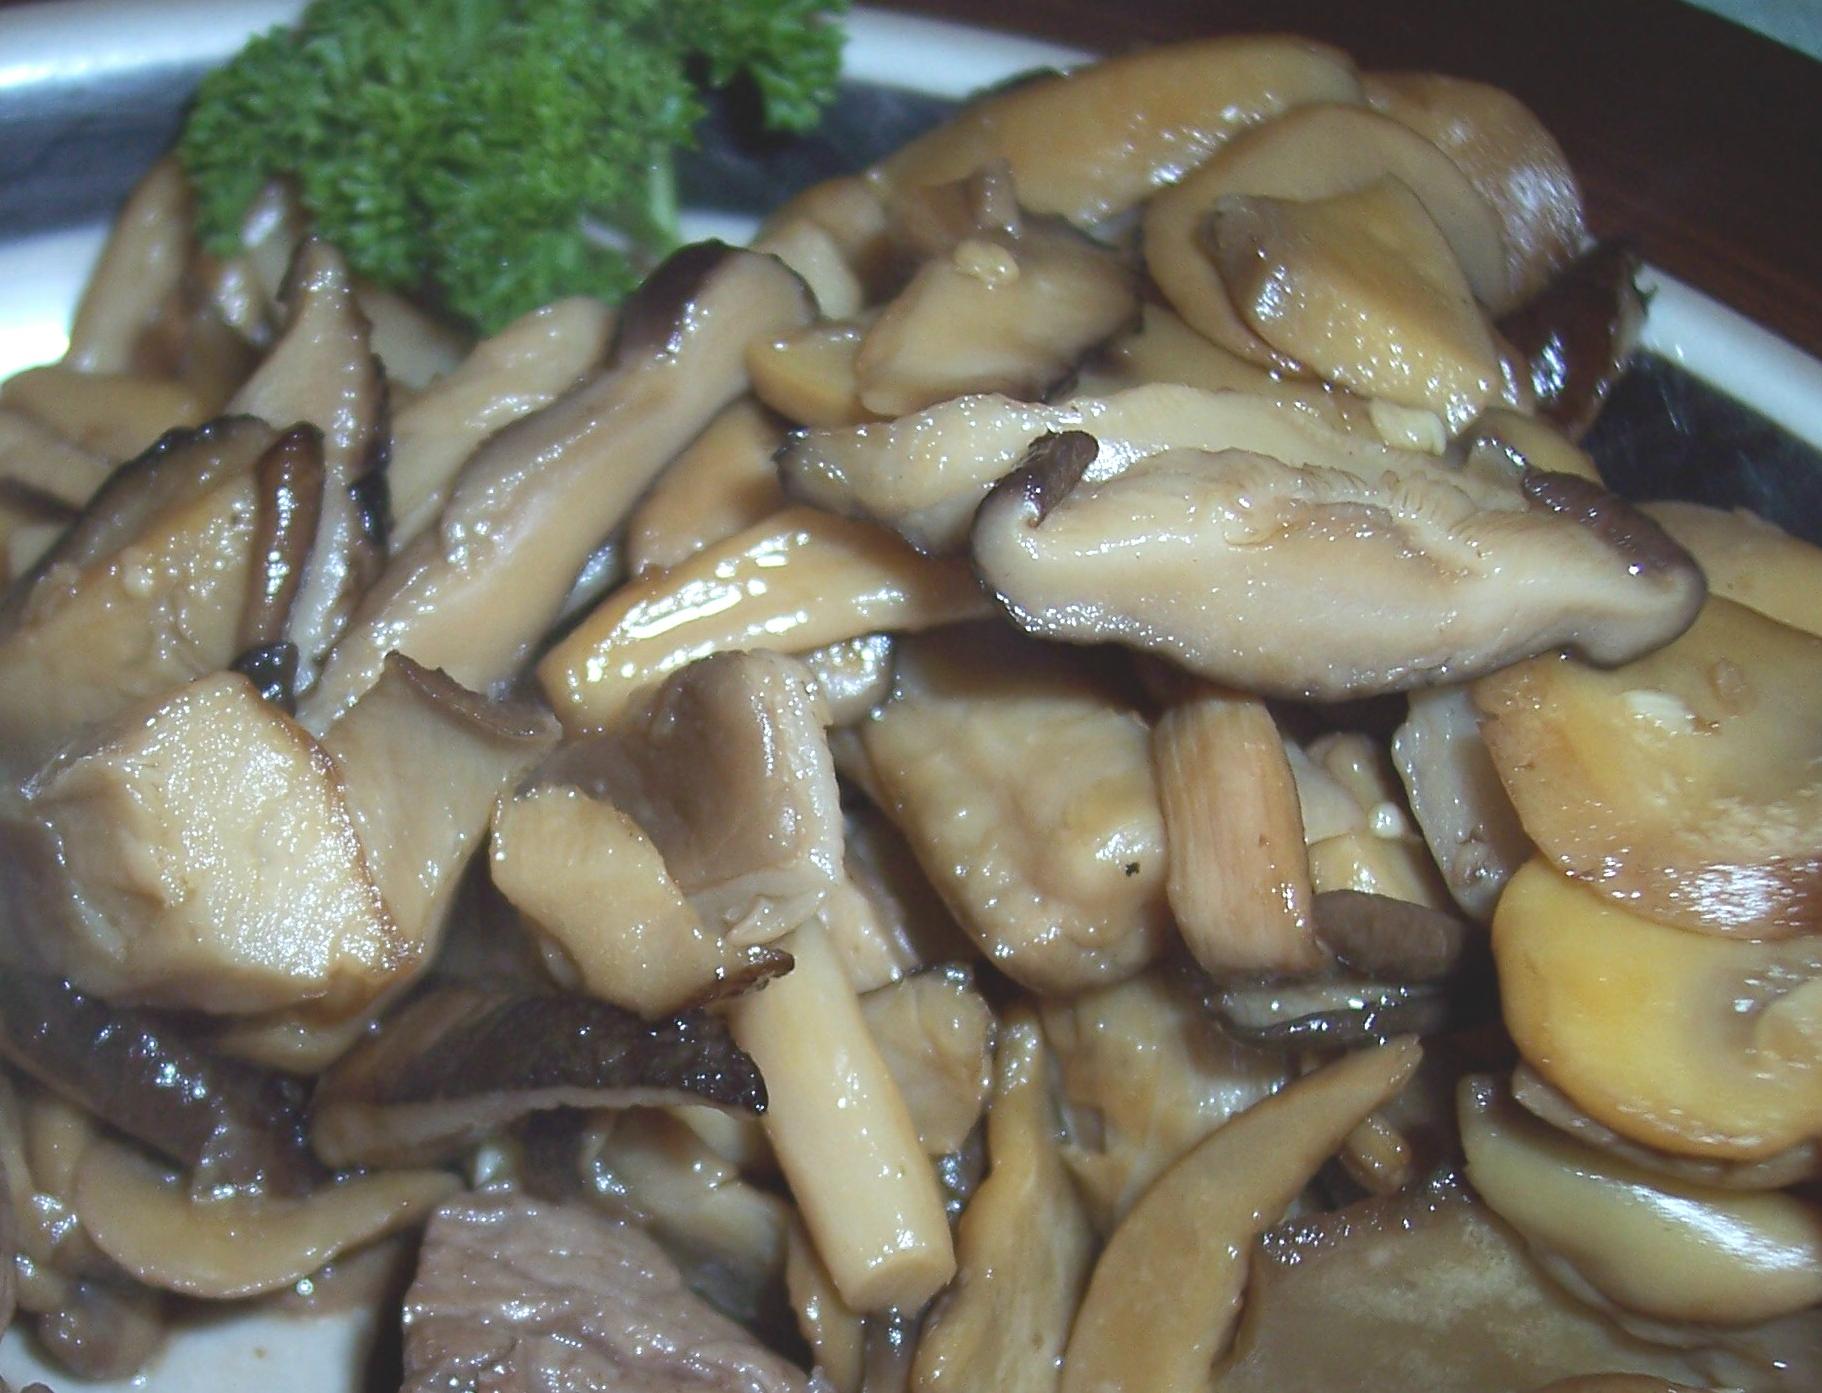  Let our gourmet mushrooms take your taste buds on a wild ride.